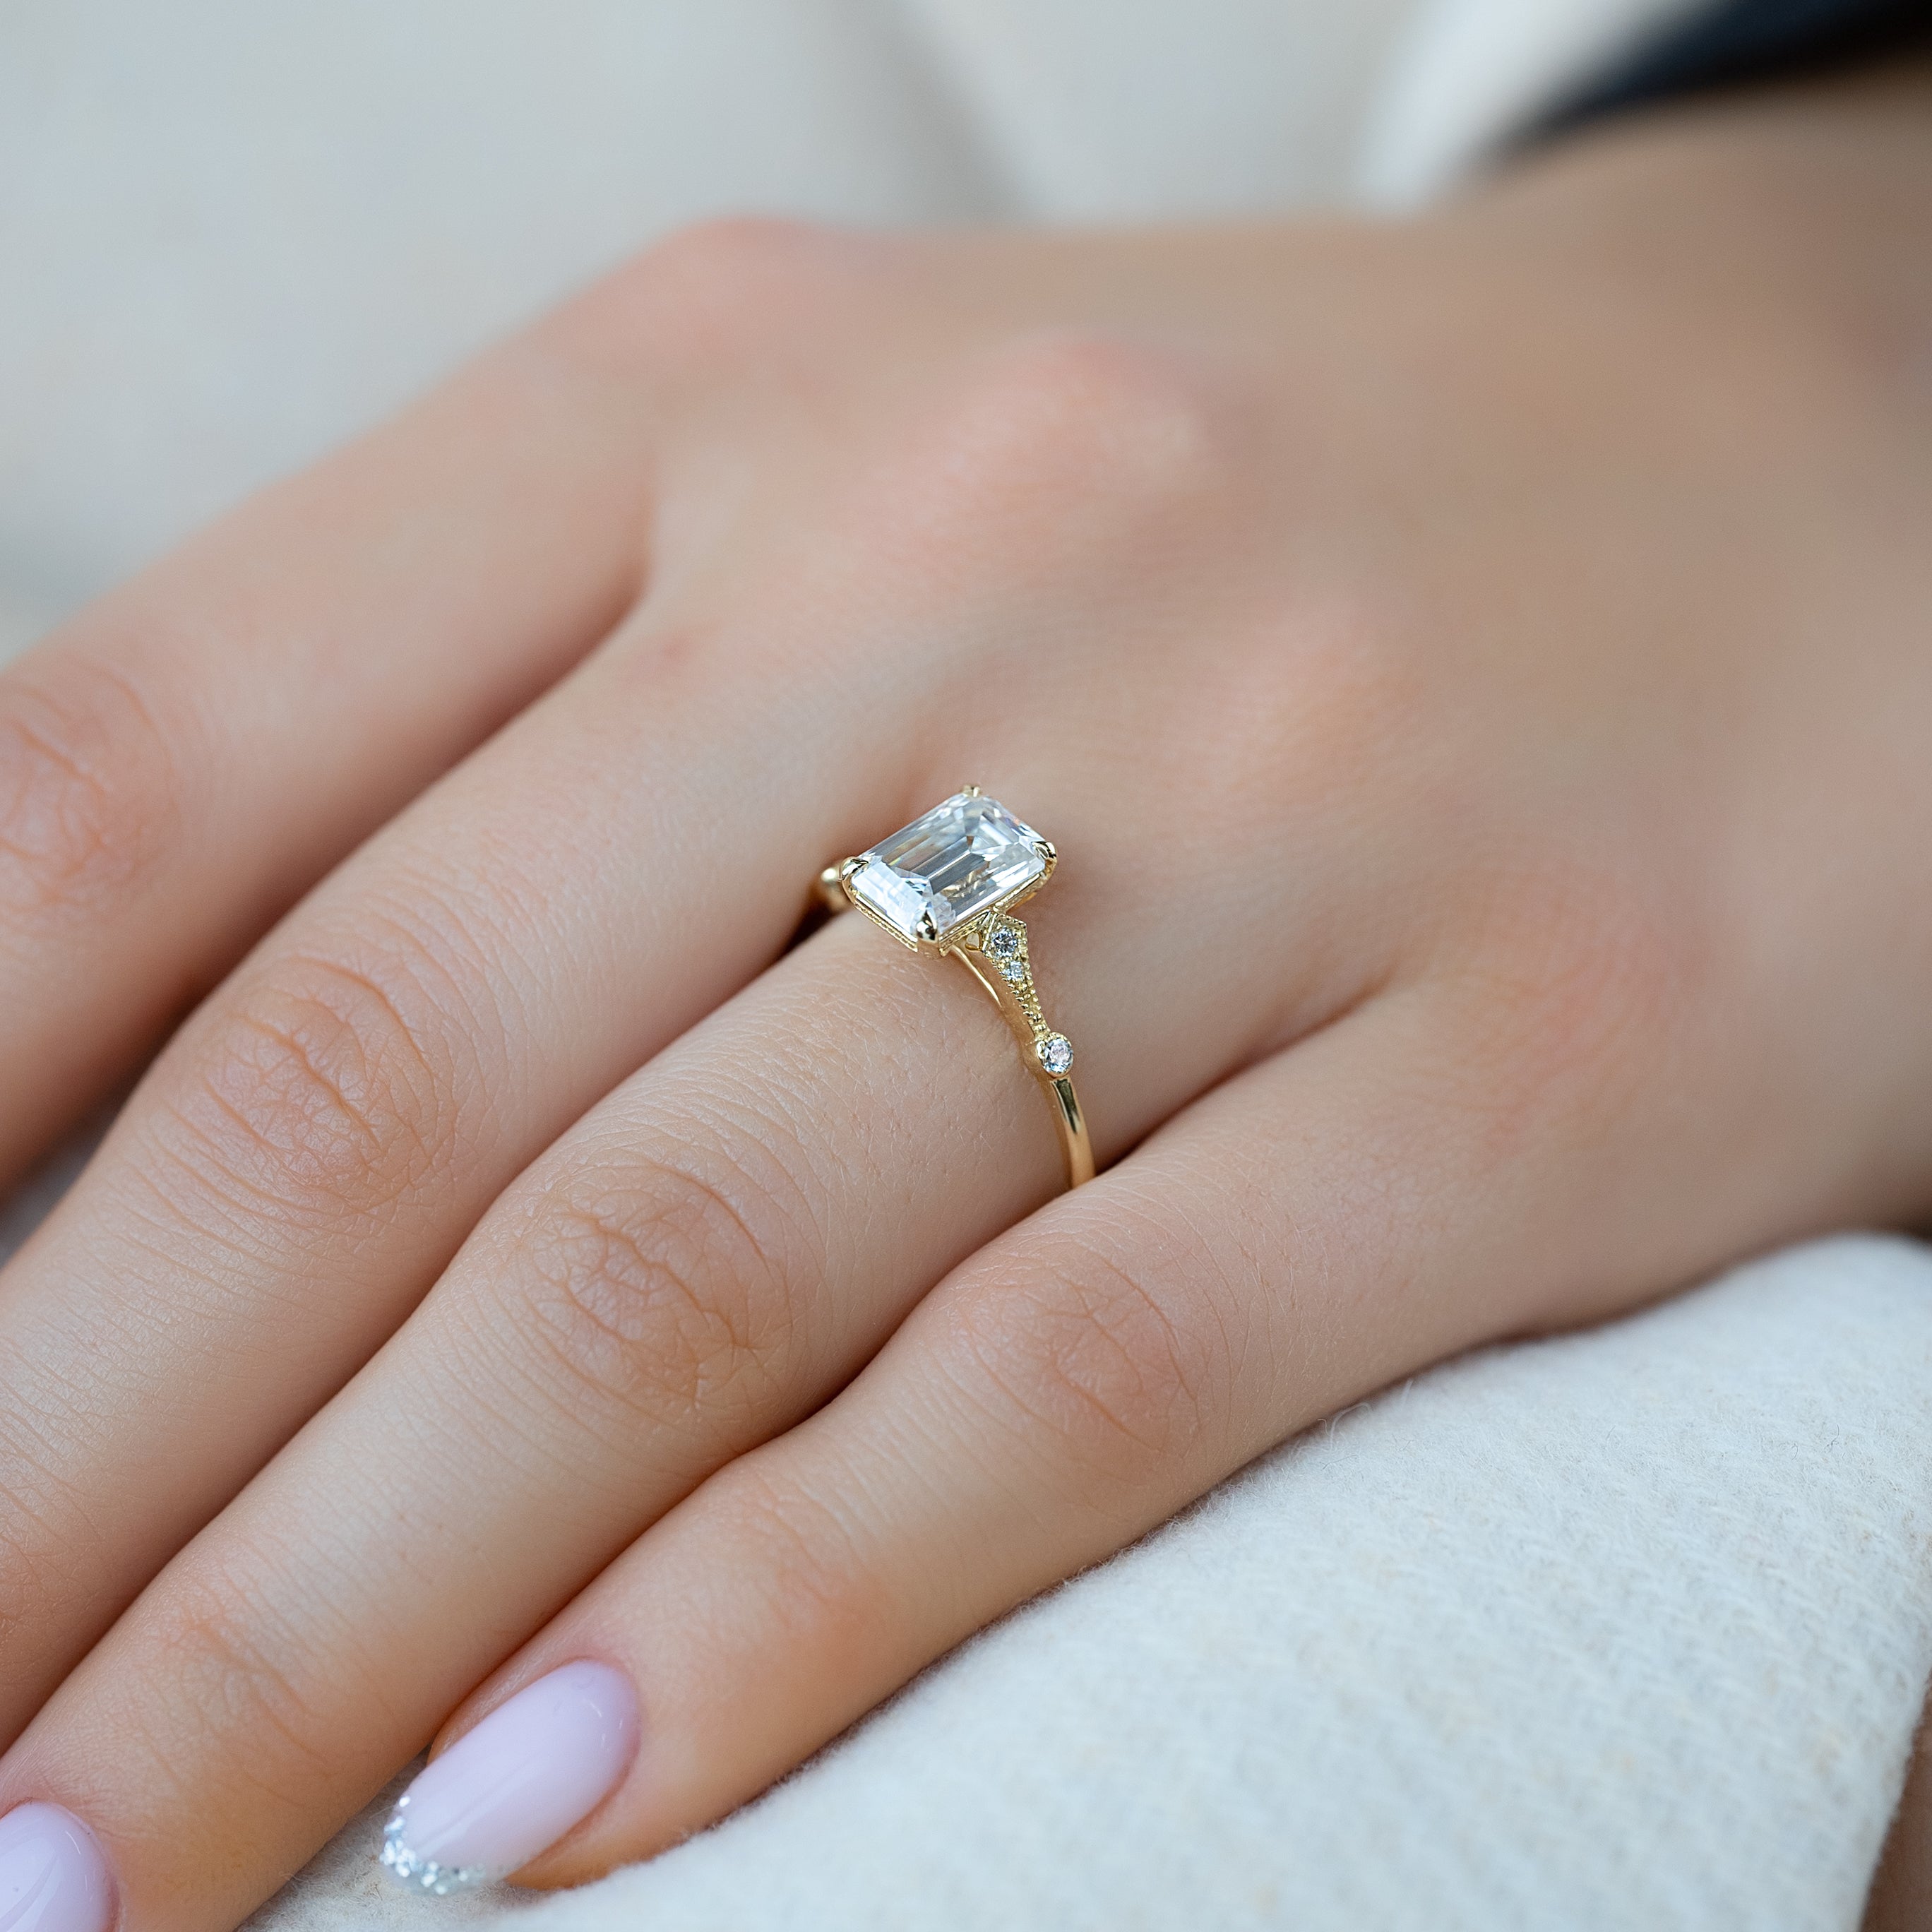 Engagement Ring Styles - A Guide To Help You Decide